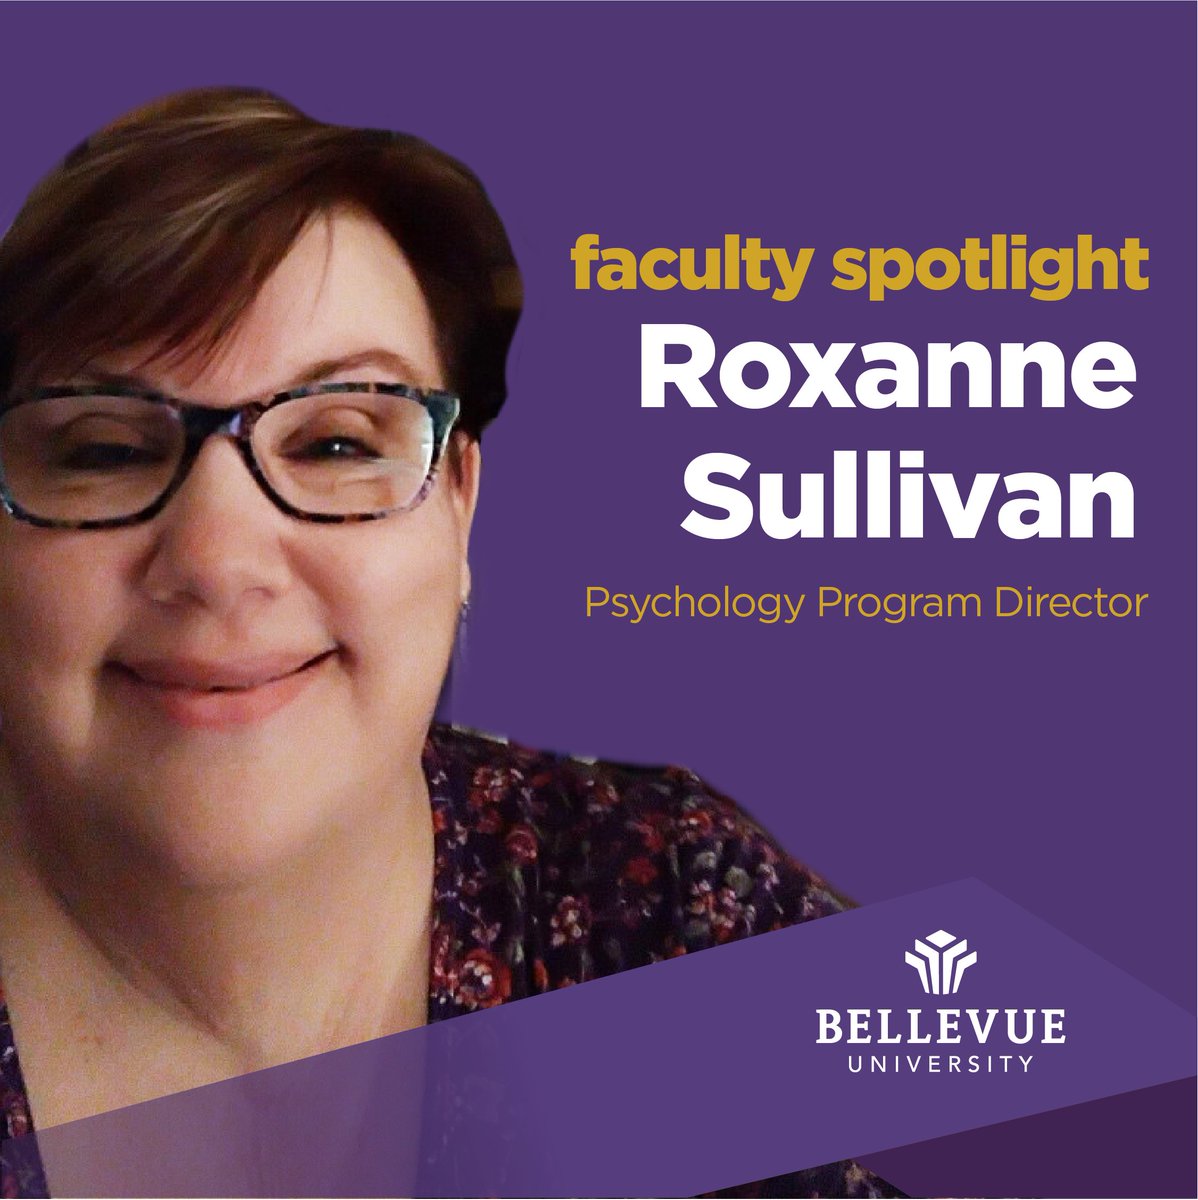 Dr. Roxanne Sullivan, Bellevue University's Psychology Program Director, champions the belief that psychology education shapes compassionate leaders equipped for diverse careers and life's challenges. Full article: news.bellevue.edu/bellevue-psych…